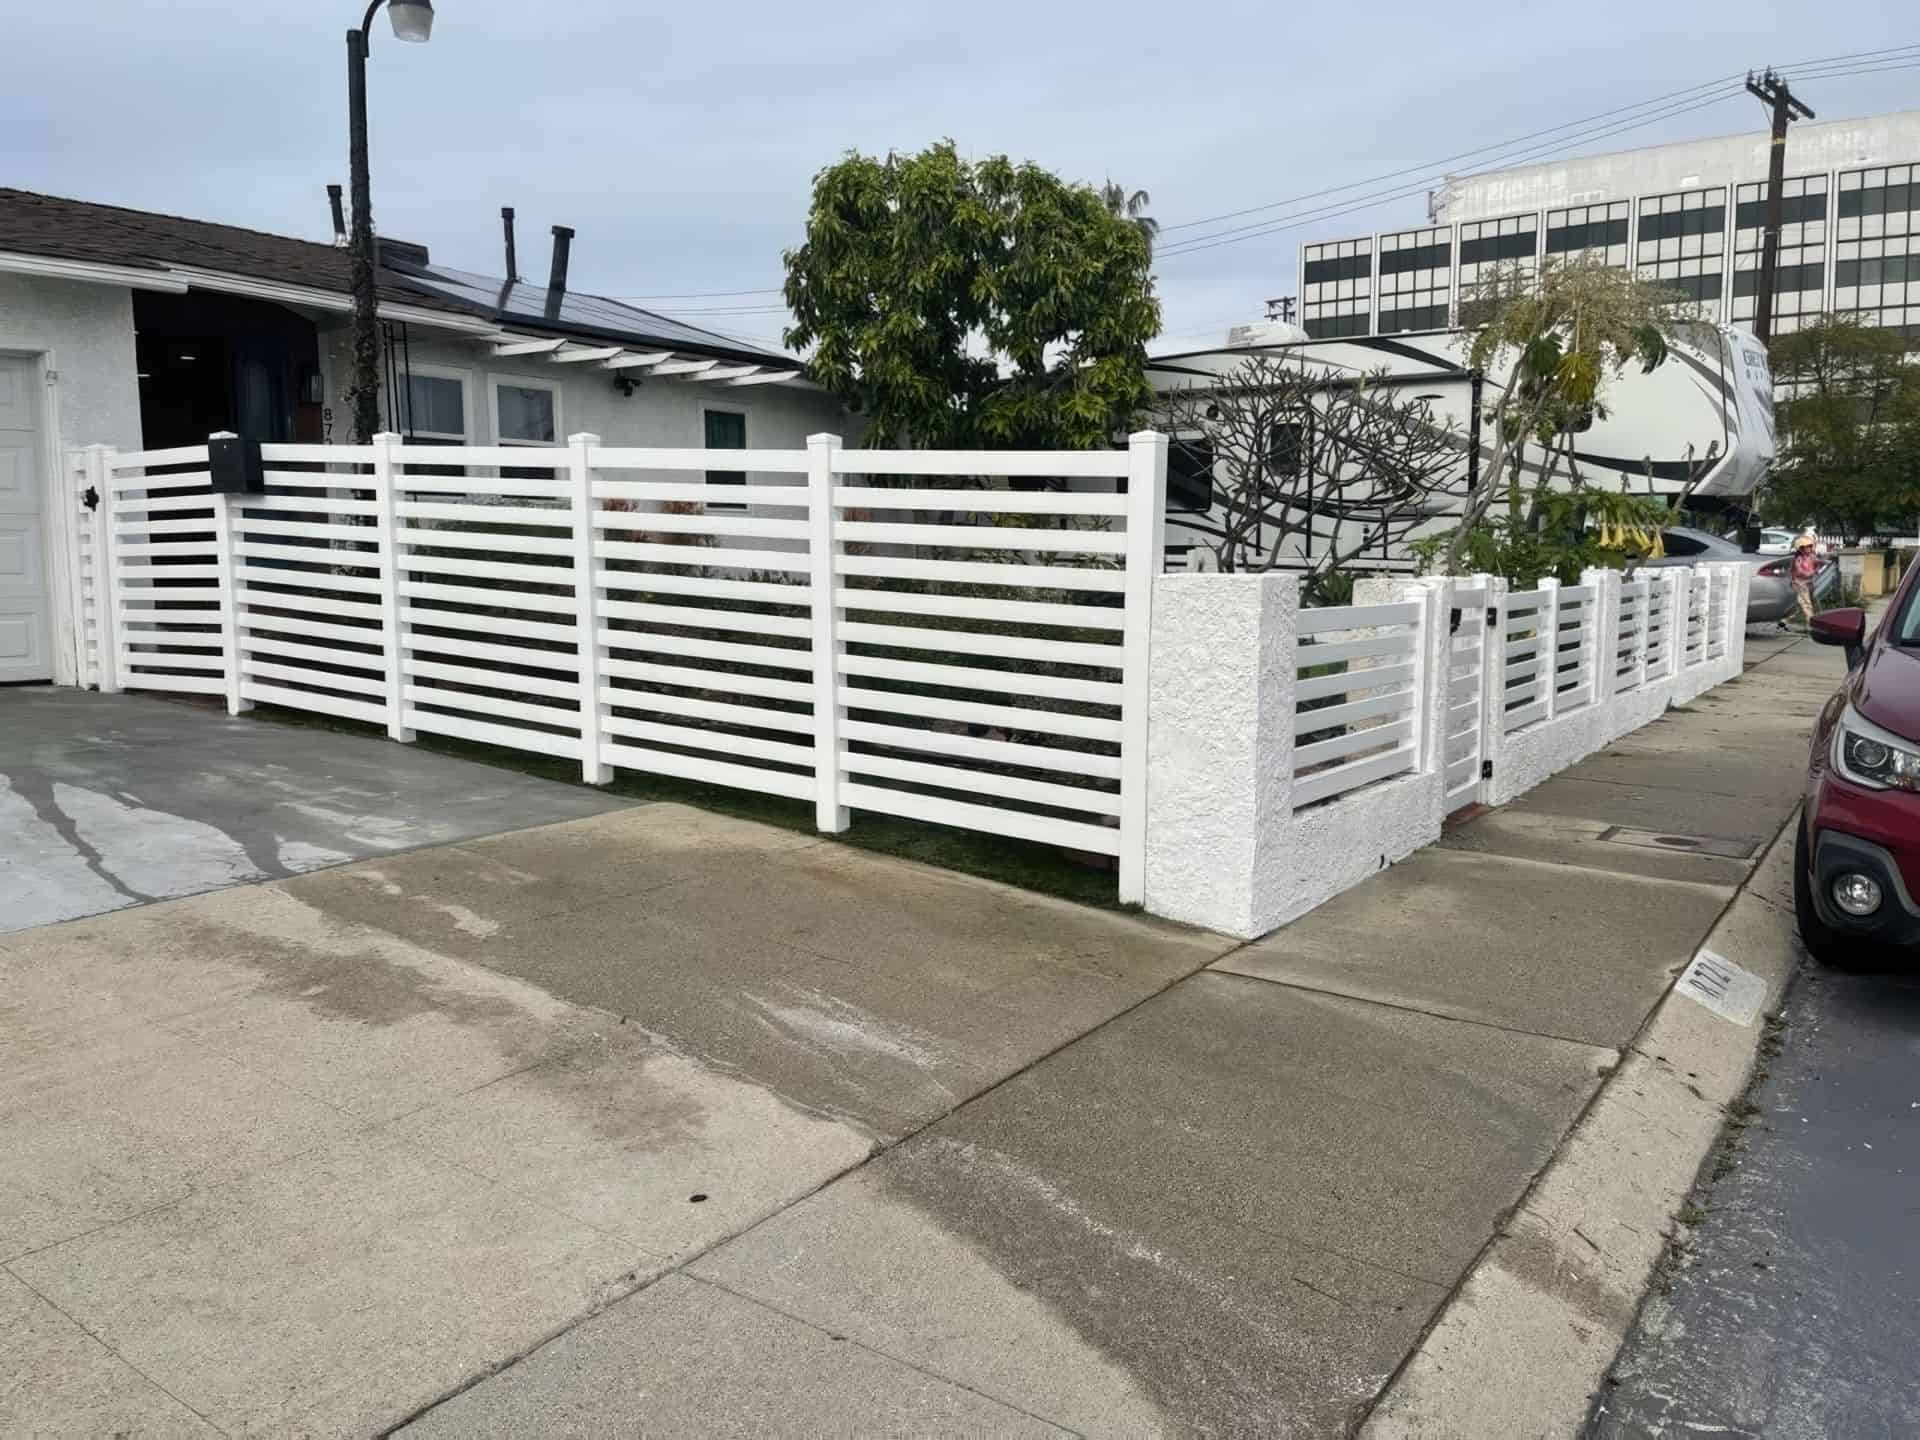 Vinyl horizontal picket fence alongside concrete sidewalk & driveway, front lawn, with trees in background.